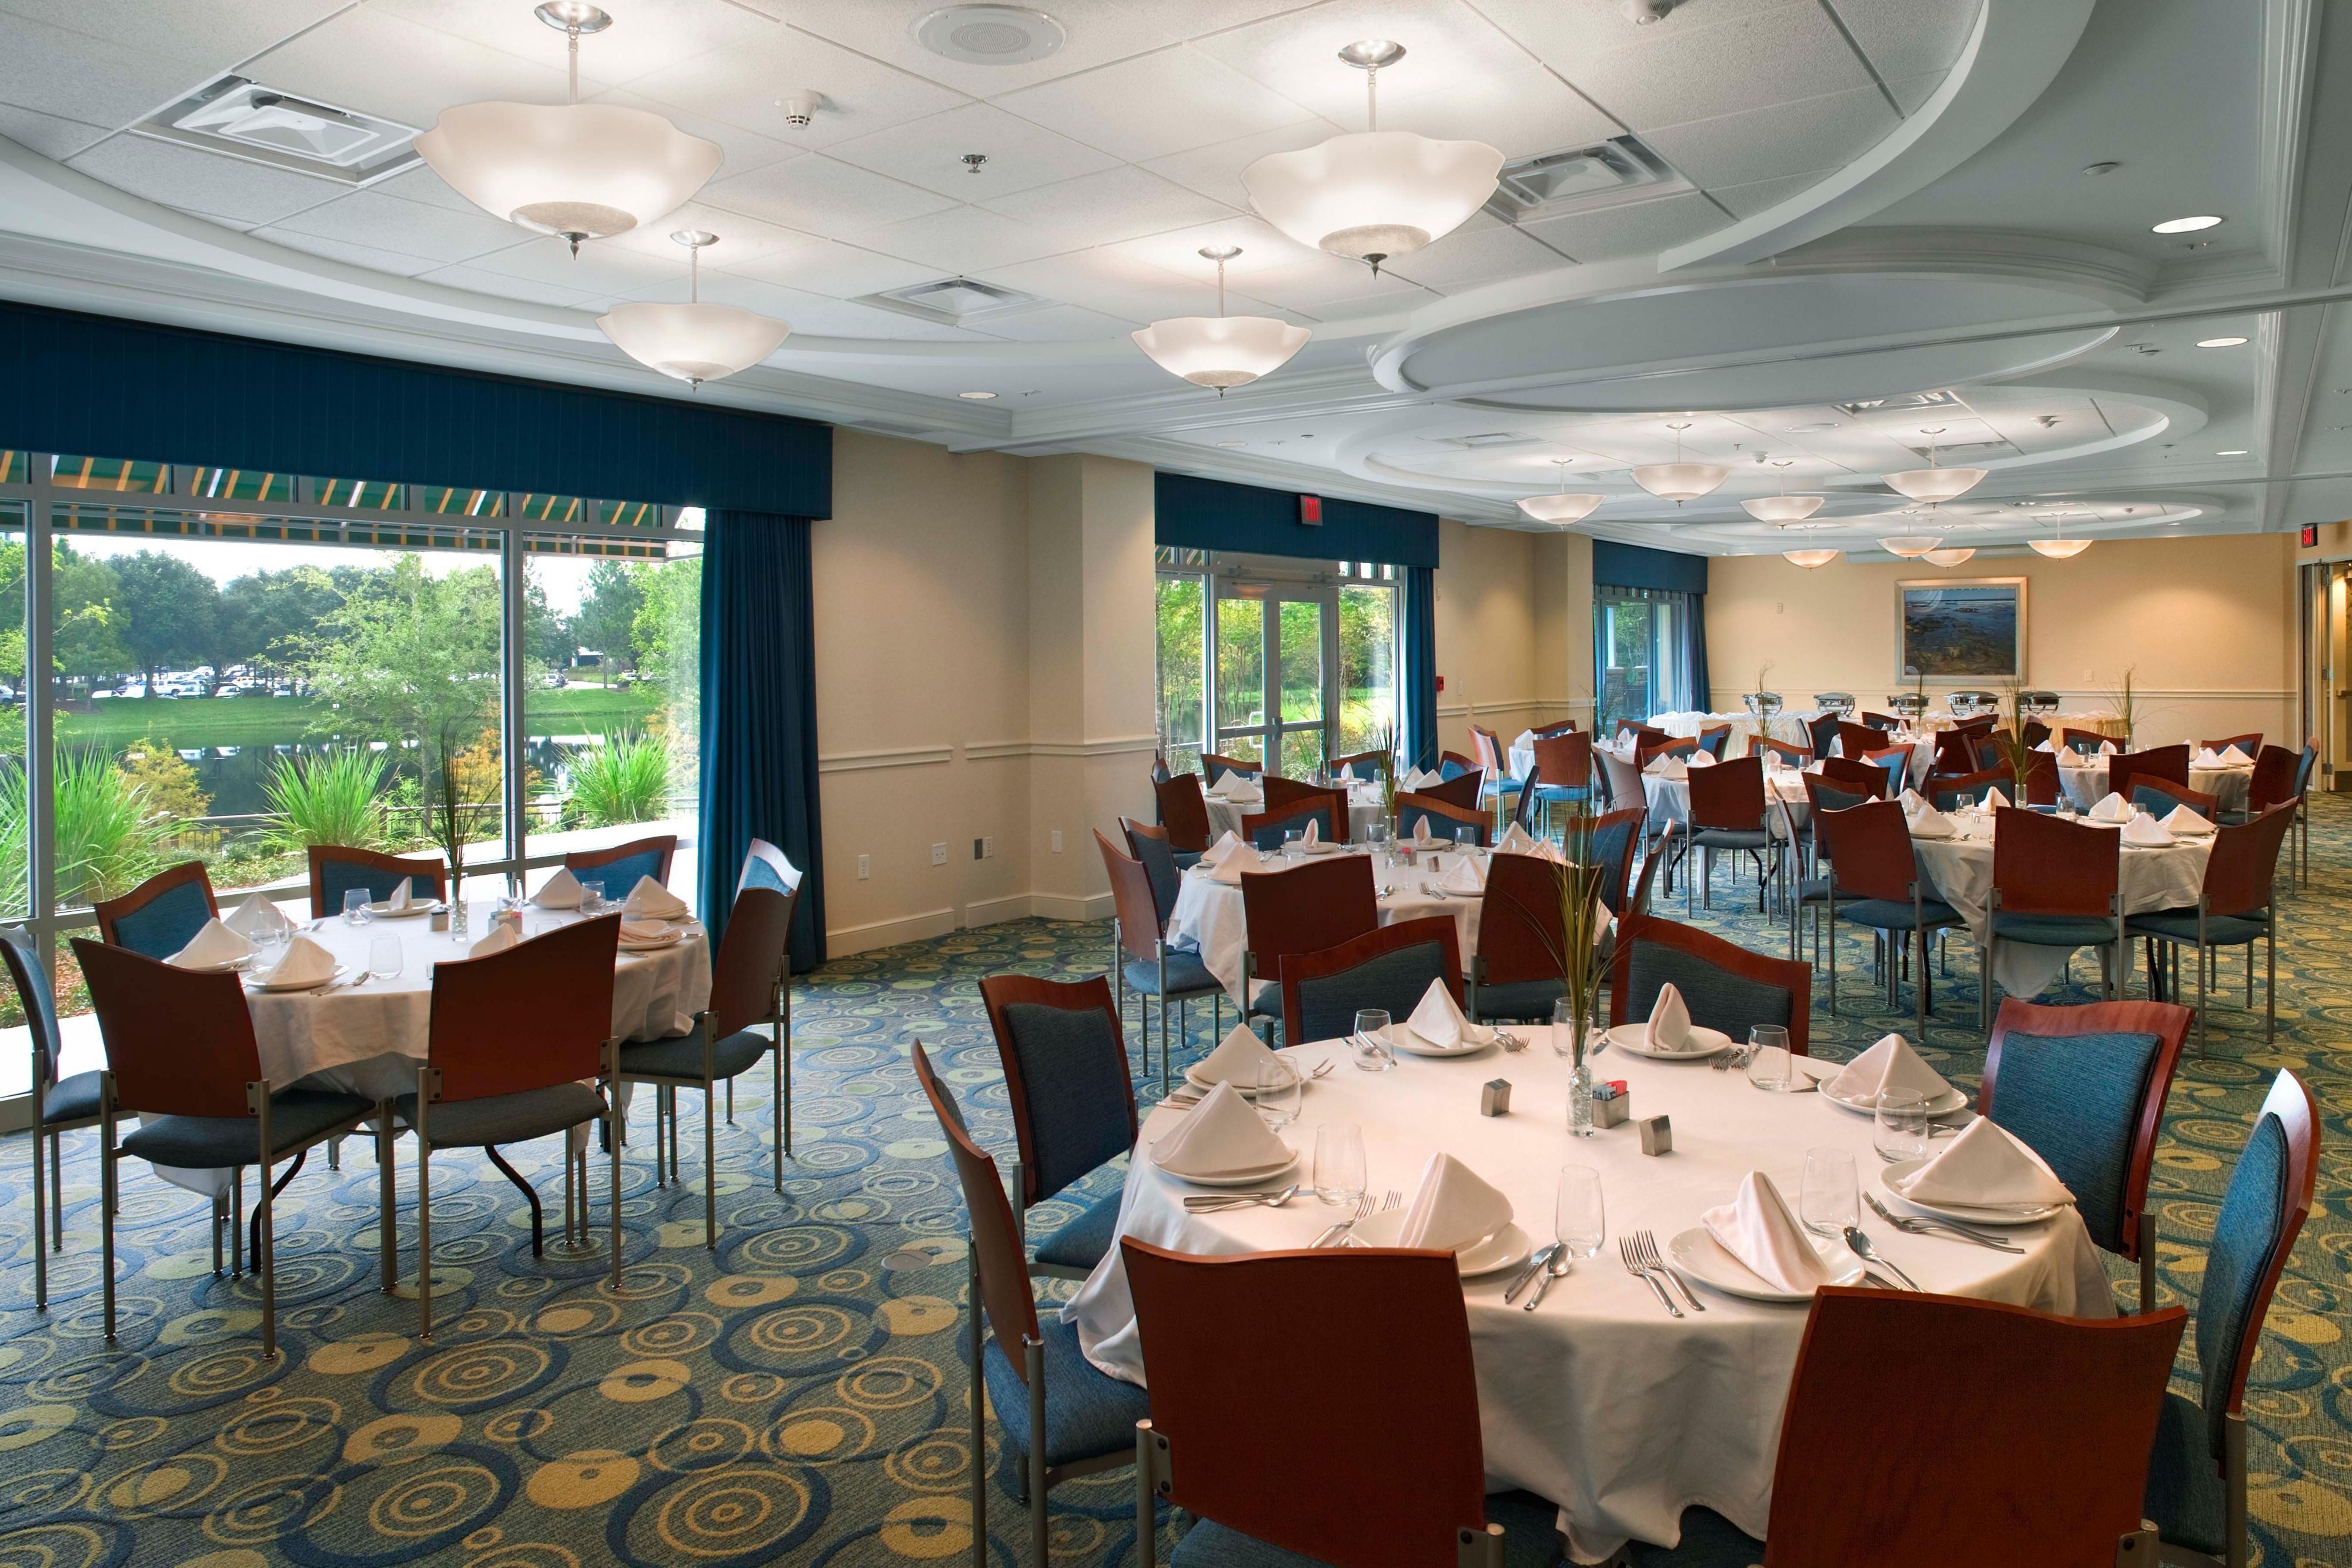 Hotel Indigo features over 2,000 square feet of flexible meeting space for private events for business or pleasure. Our meeting spaces offer floor-to-ceiling lake views and access to a pool side, lake front patio for refreshments and cocktail parties. 